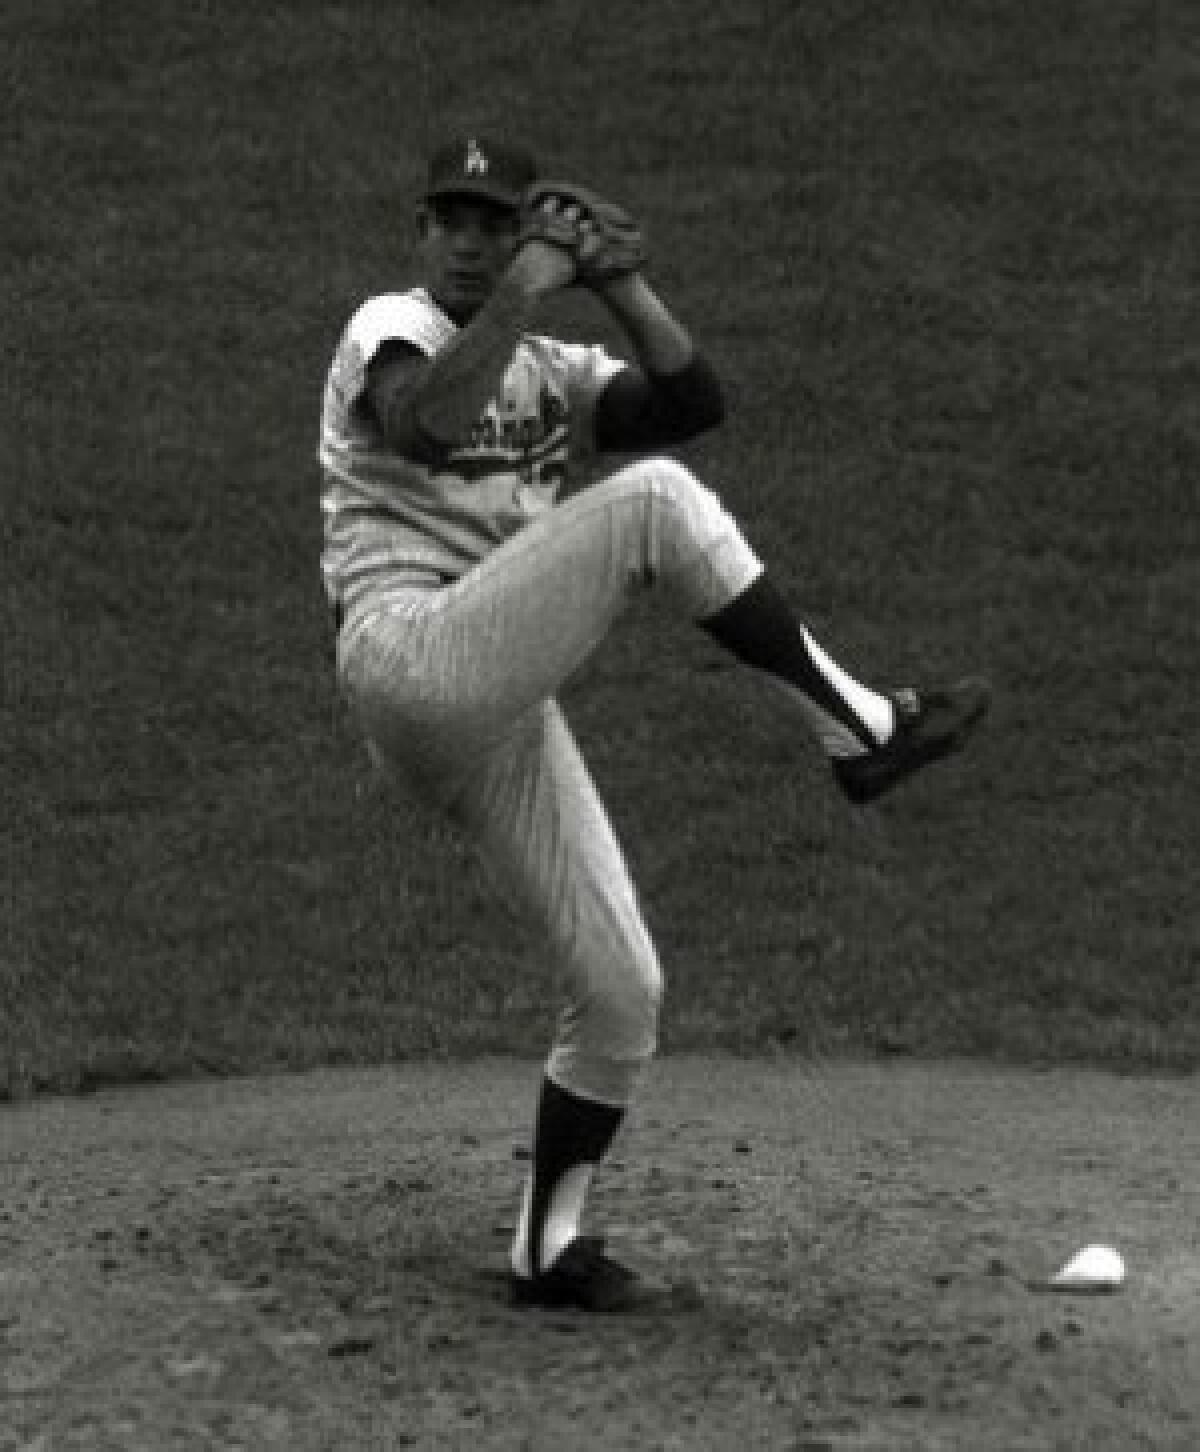 Nick Willhite, shown pitching against the New York Mets in 1964, tossed a shutout in his major league debut with the Dodgers in 1963. It was the highlight of a five-season career. He also played for the Angels.